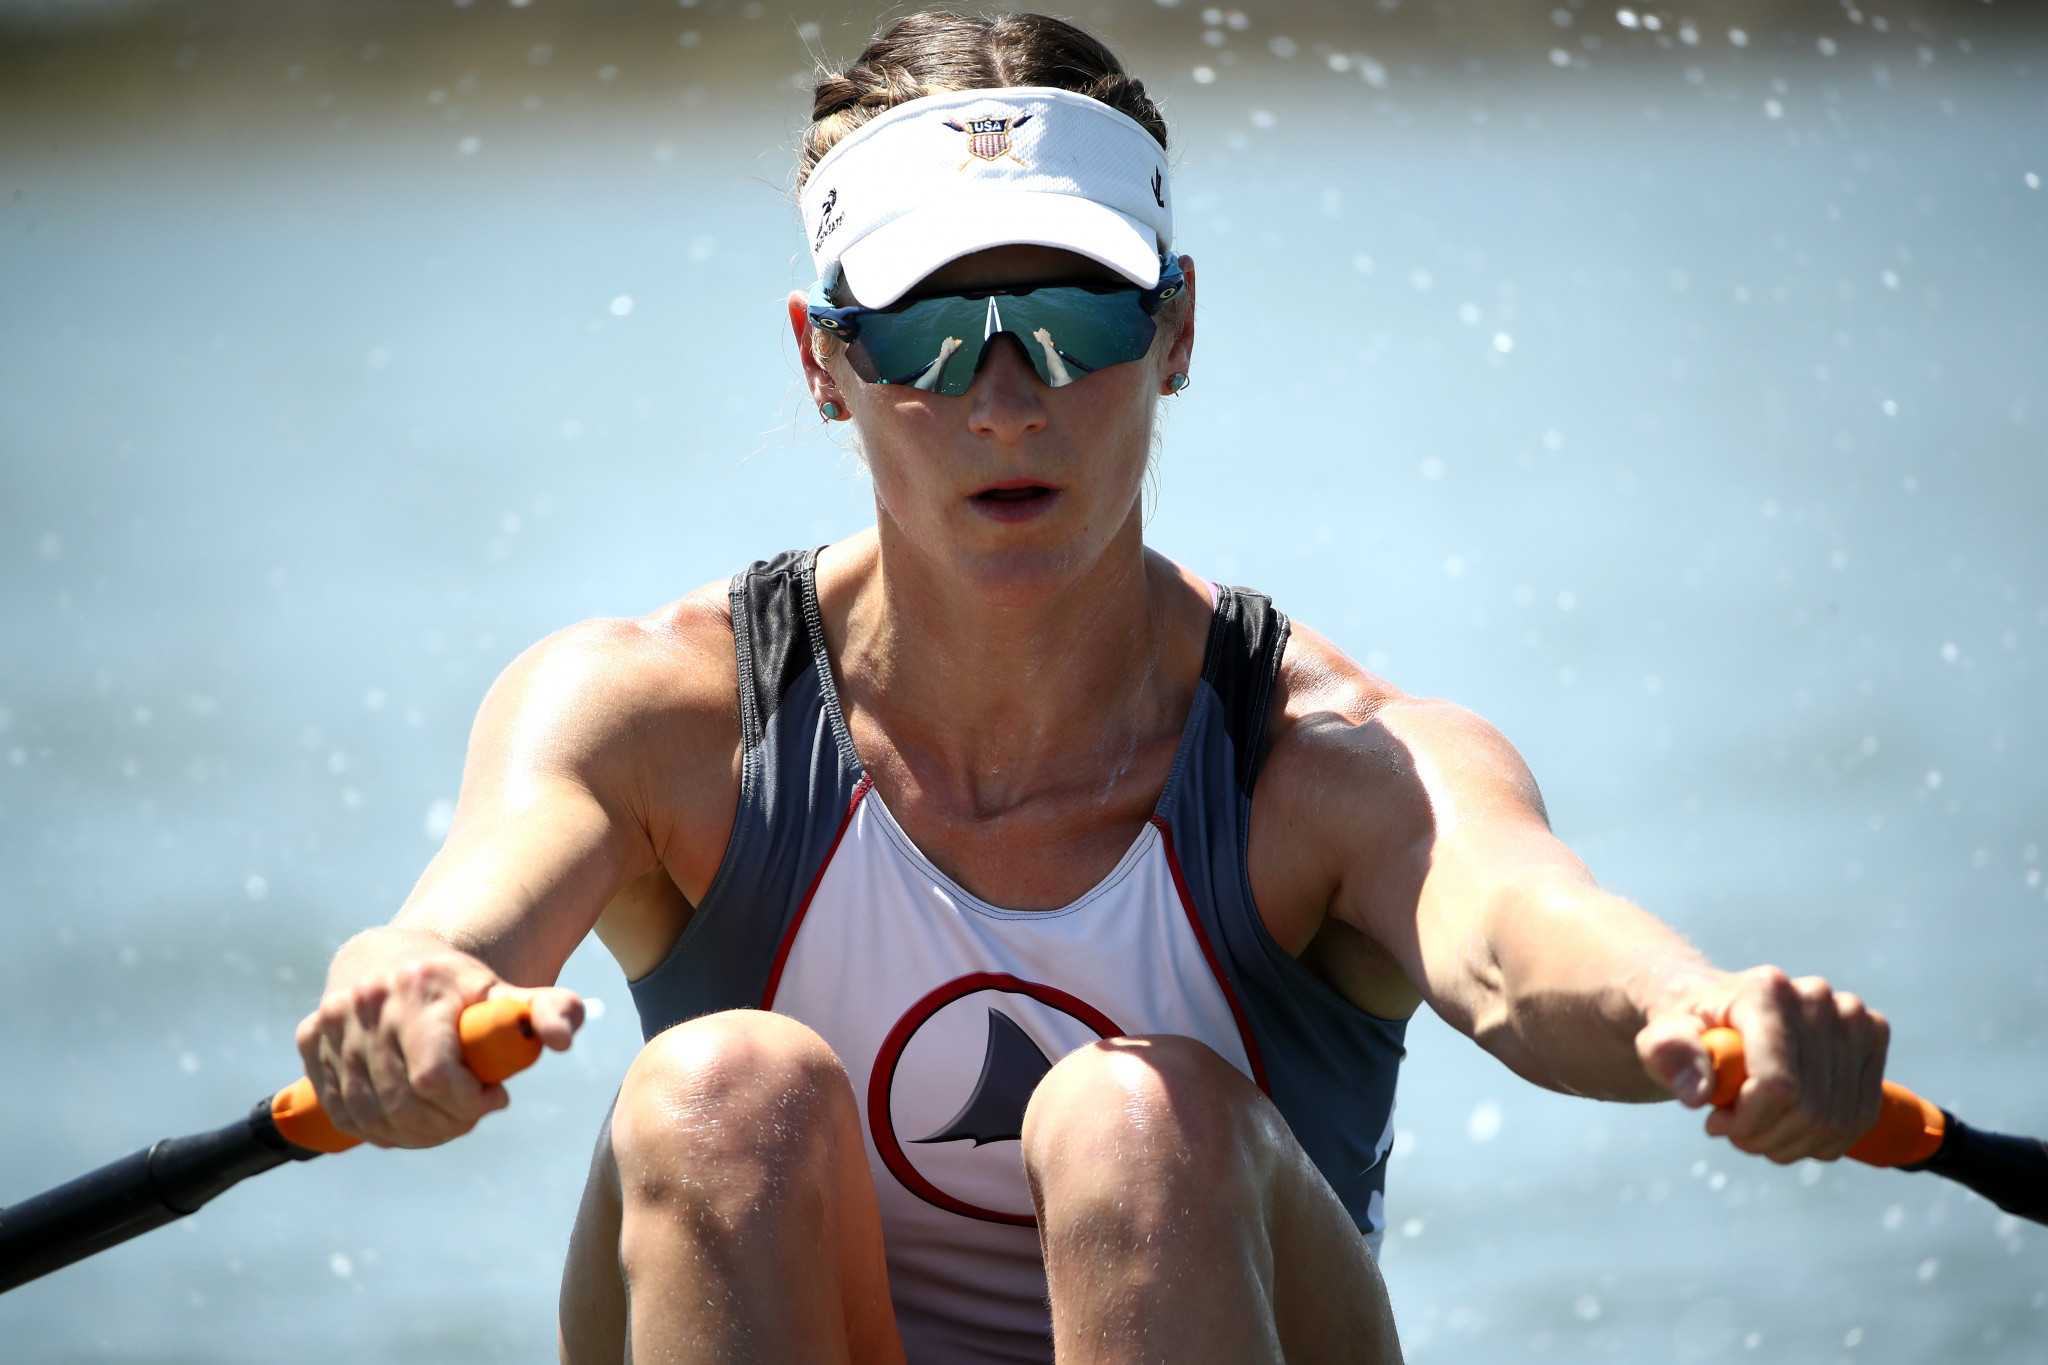 Kara Kohler earned a place on the US rowing team for the Tokyo 2020 Olympics ©Getty Images